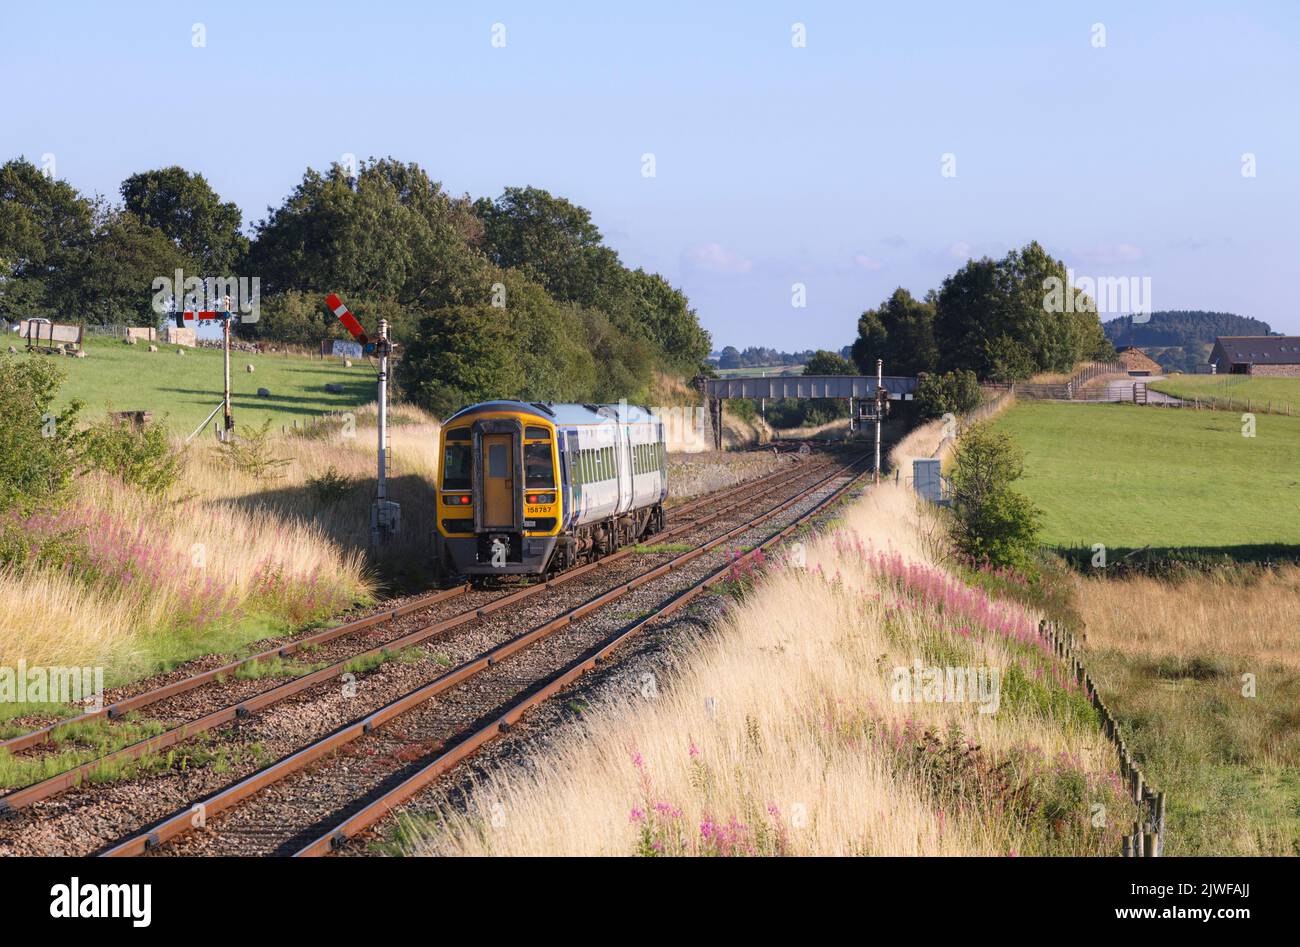 Northern rail class 158 Diesel multiple unit  train passing the mechanical semaphore signals at Settle junction, Yorkshire, UK Stock Photo